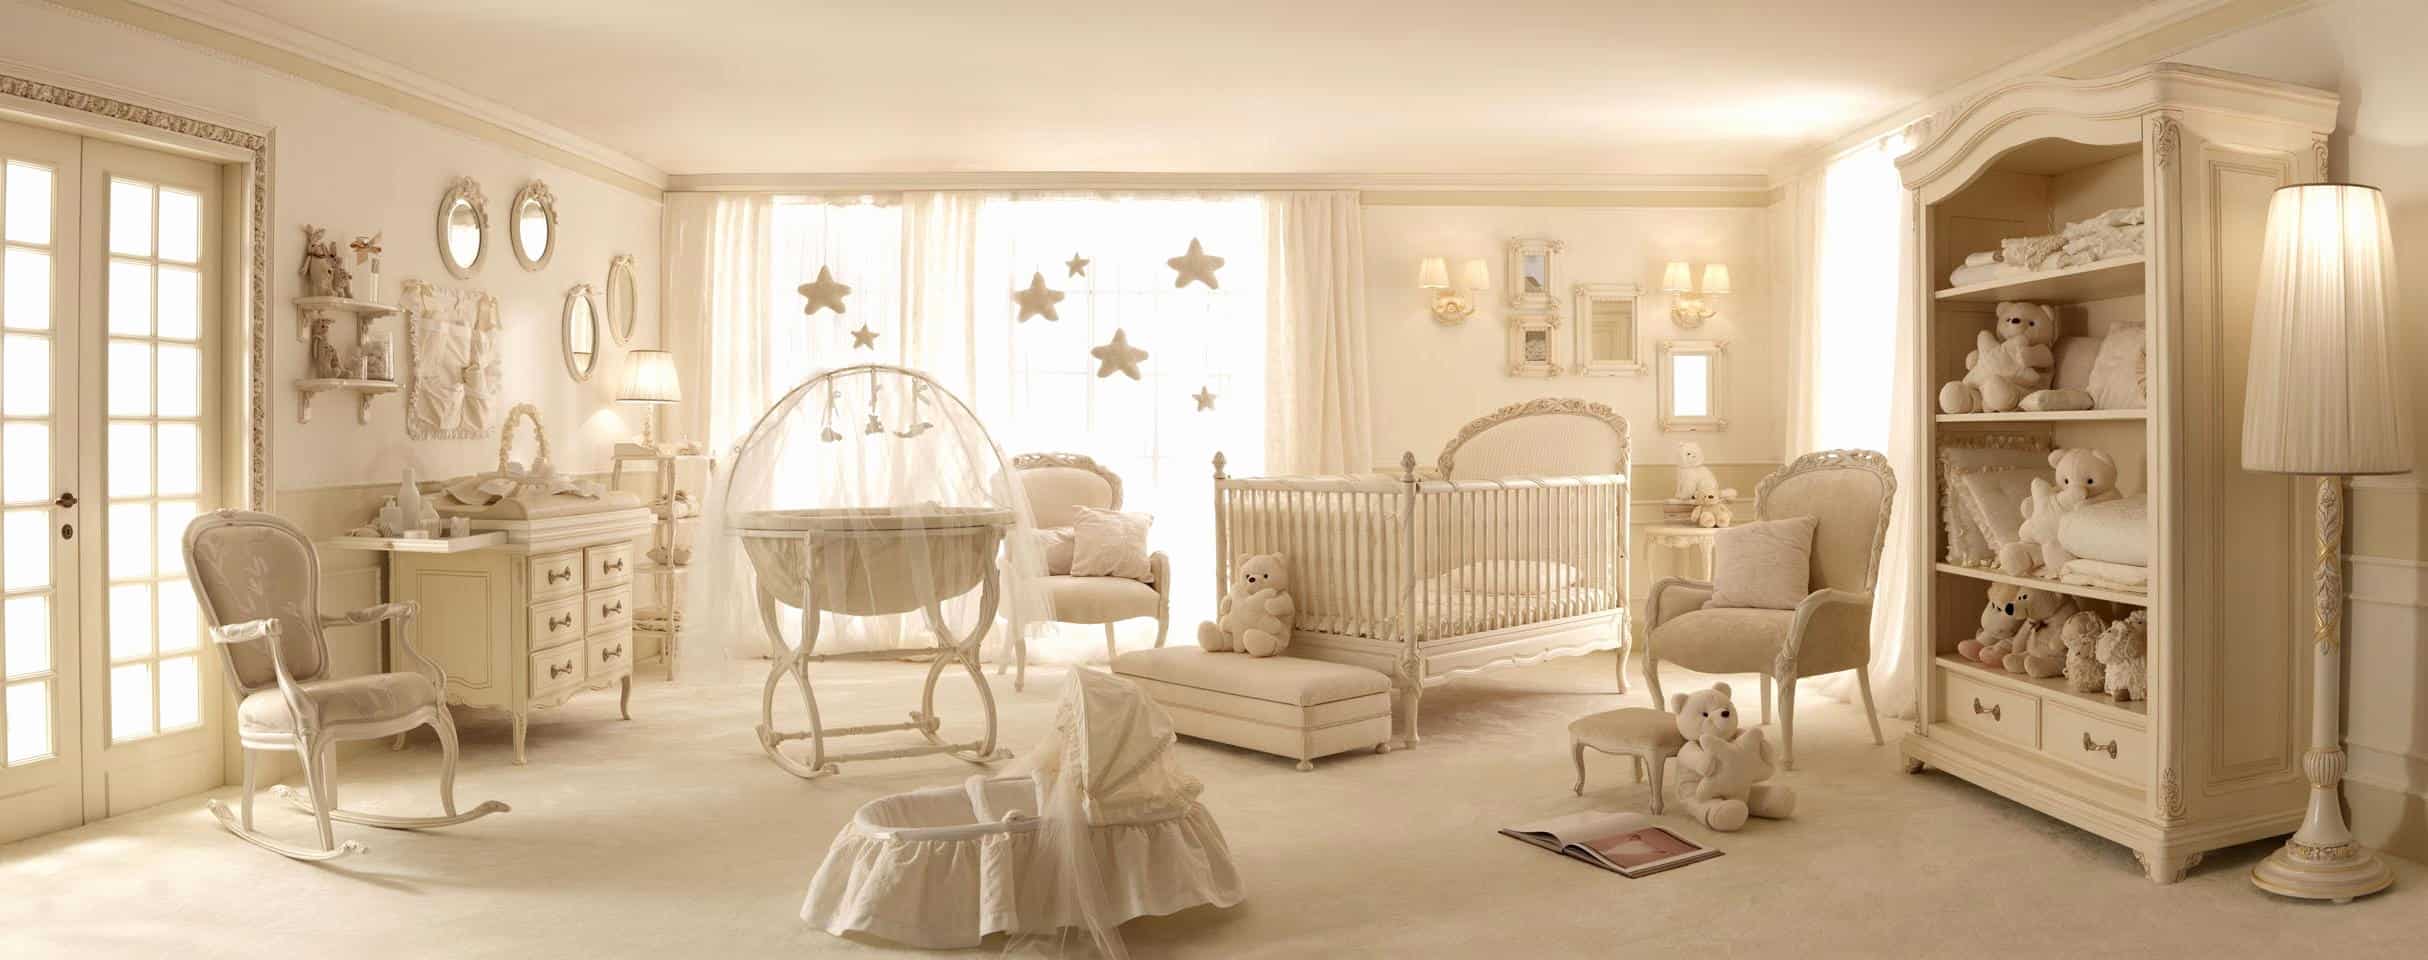 Gender neutral is perfect when you want to decorate your nursery without adding bold hues.